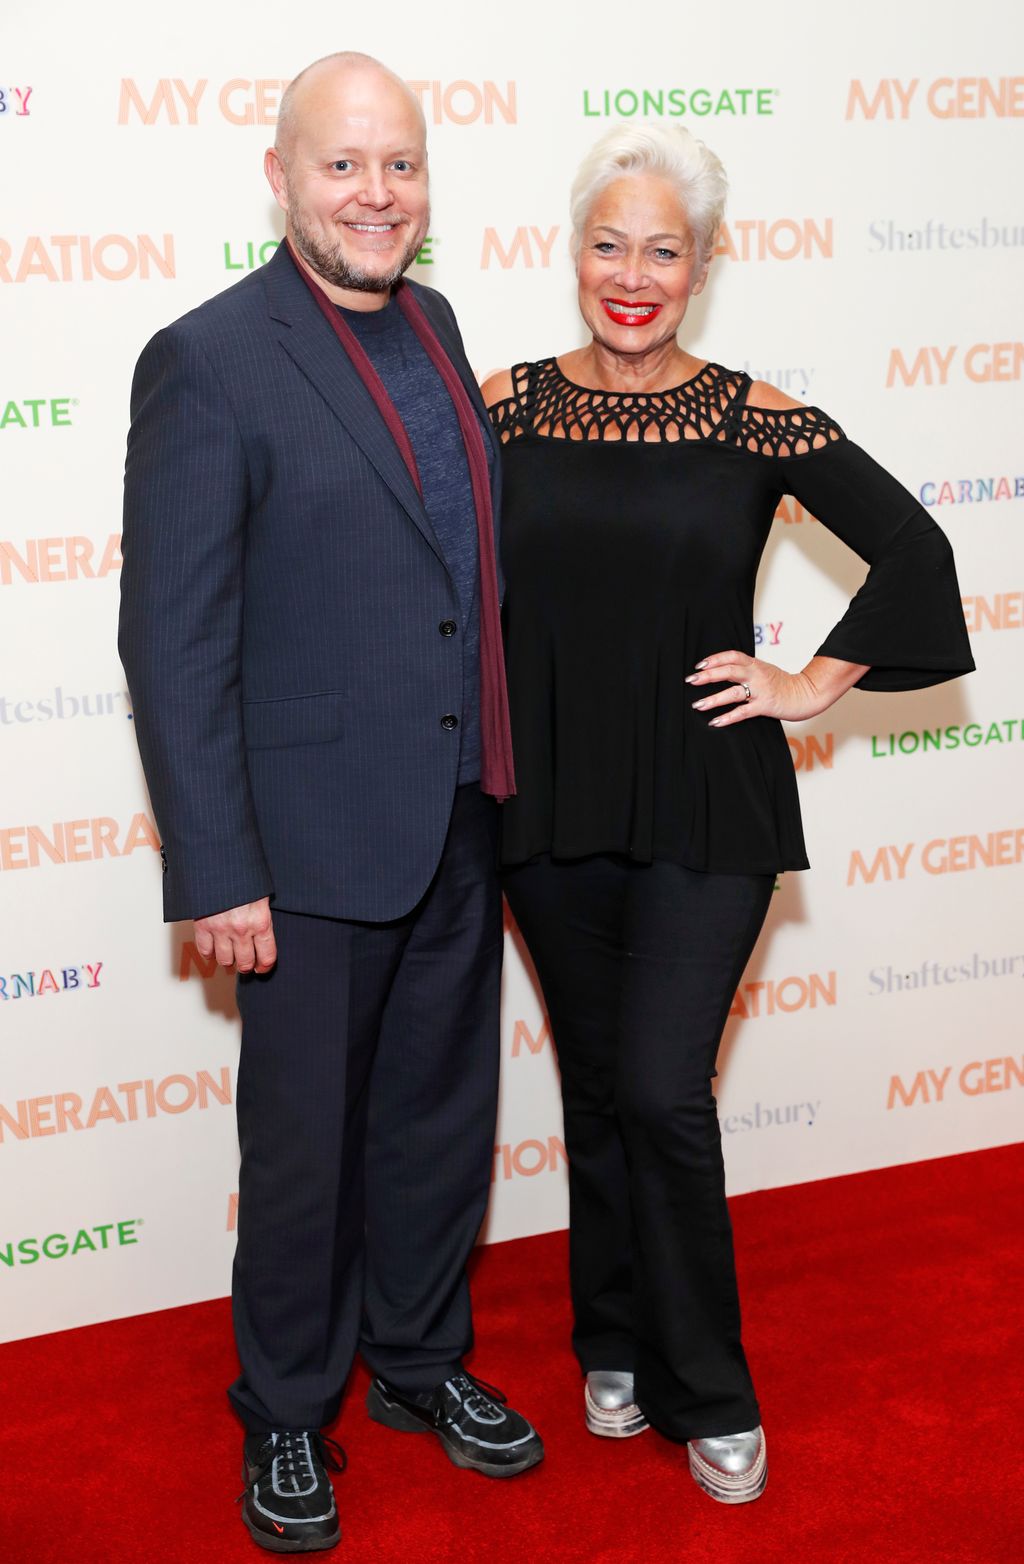 Lincoln Townley in a blue suit on the red carpet with Denise Welch in a black dress